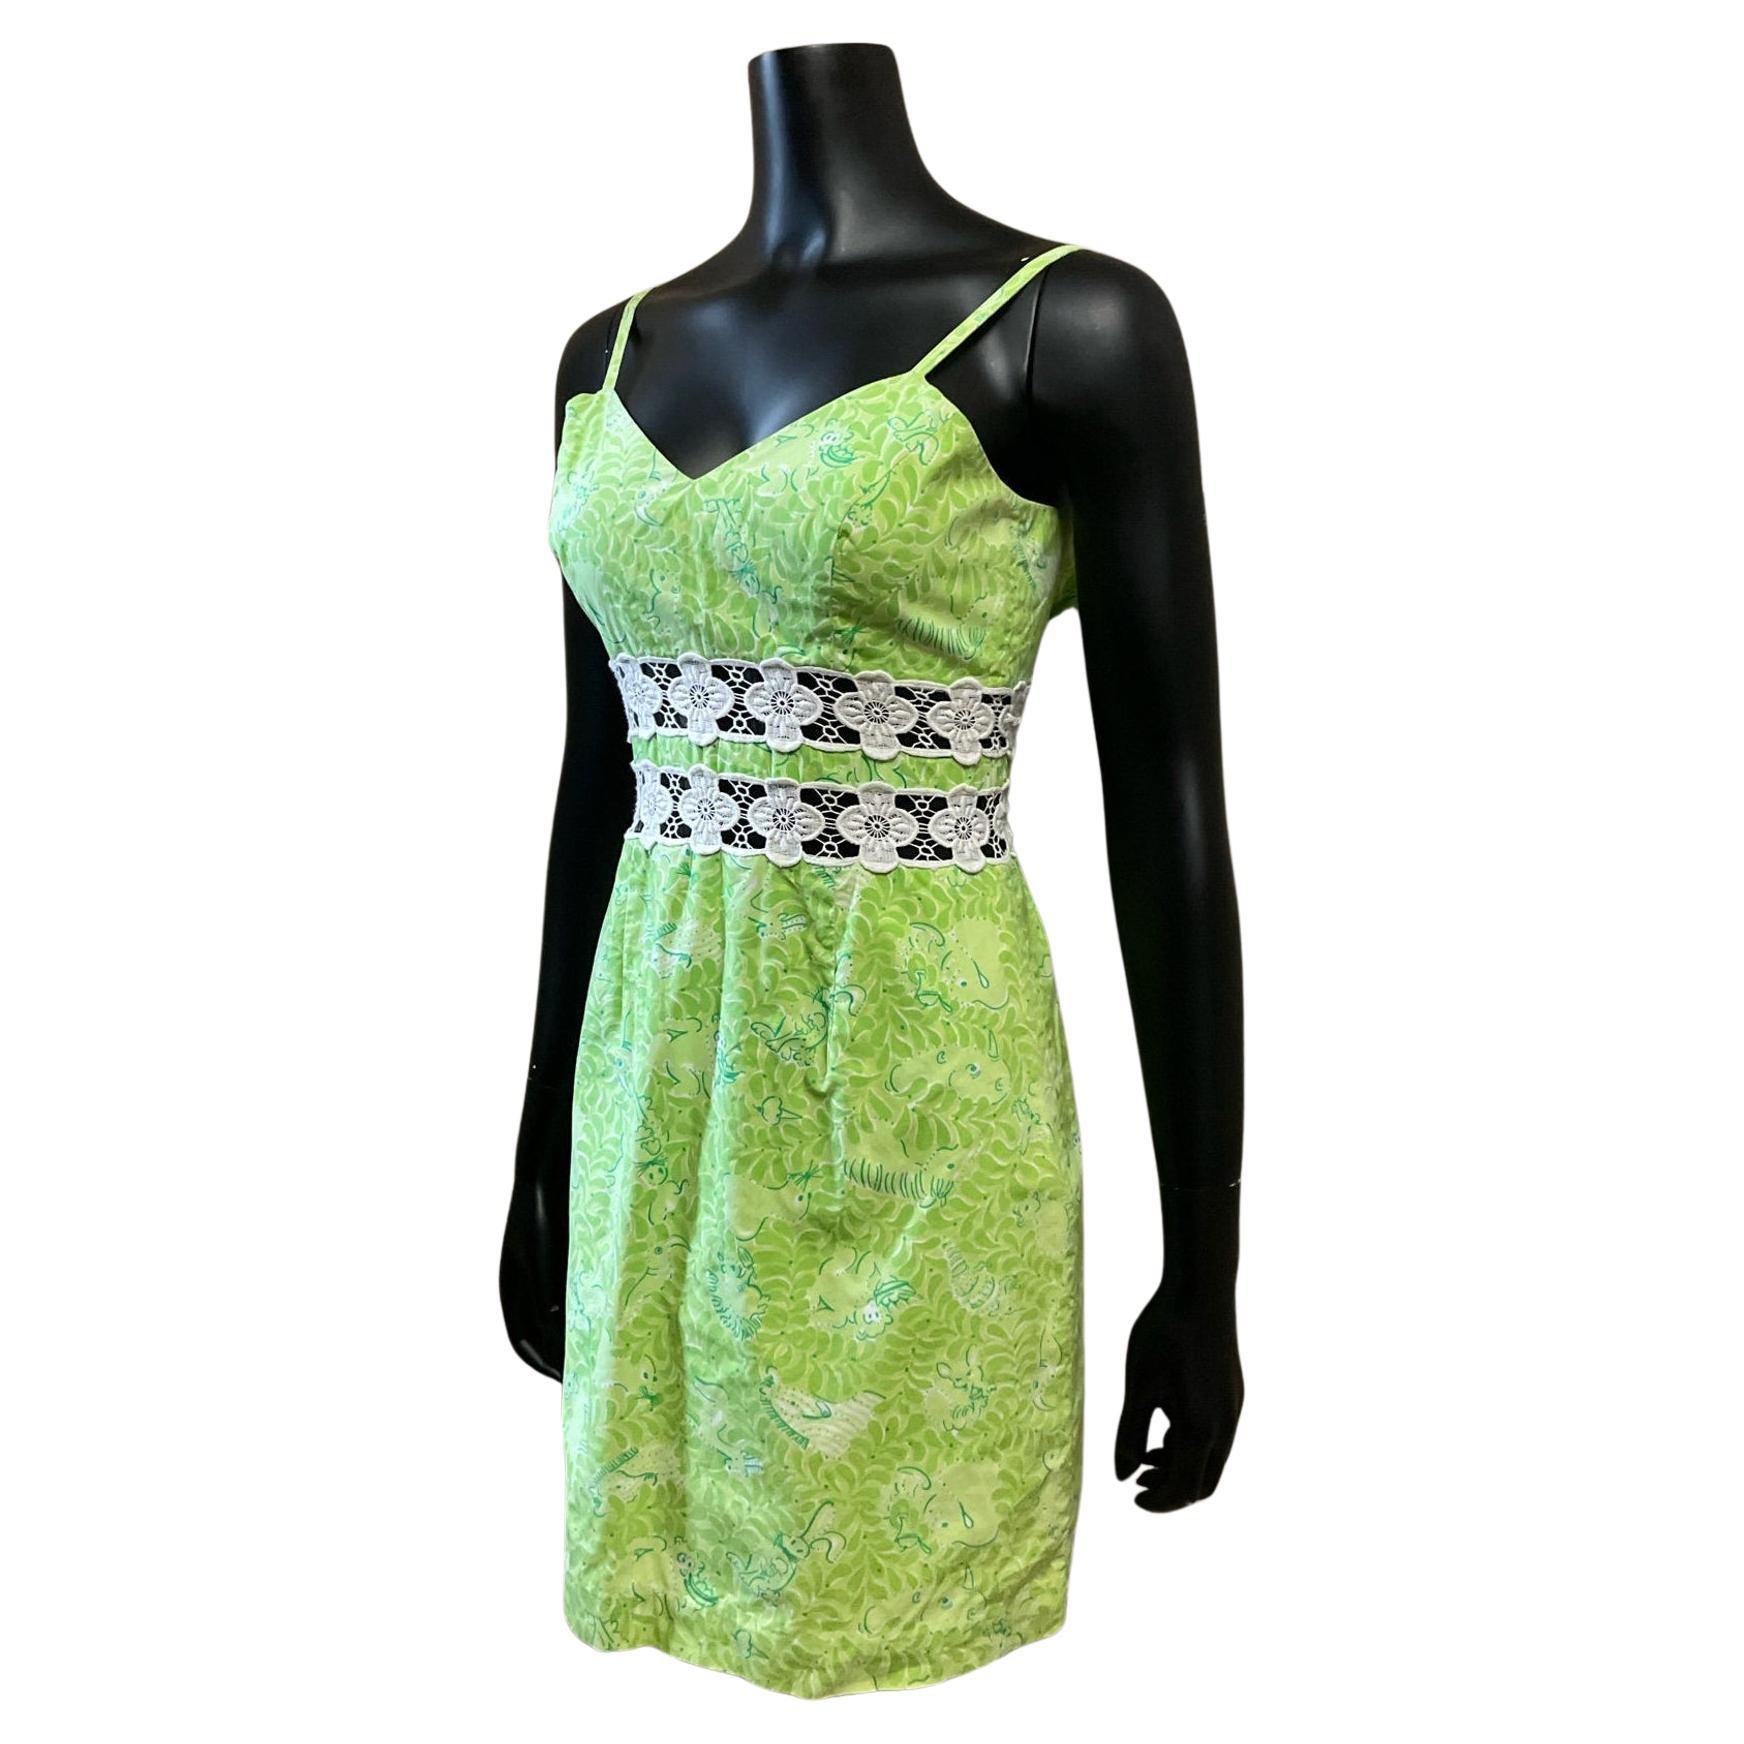 Lilly Pulitzer Lime Green Mini Dress, Circa 1990s For Sale 2